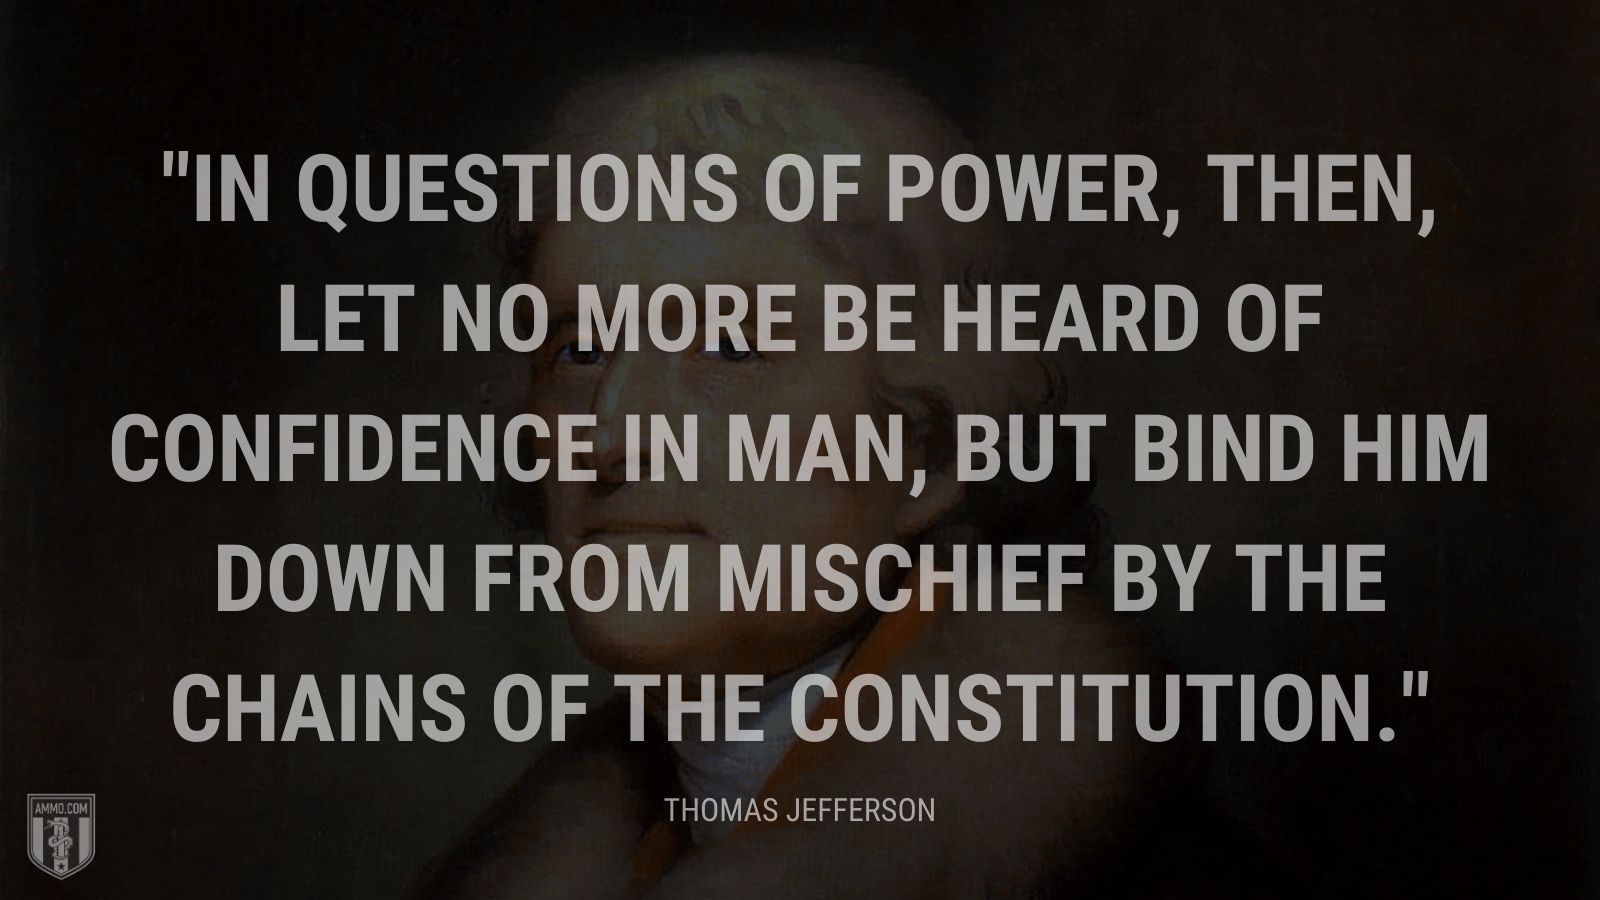 “In questions of power, then, let no more be heard of confidence in man, but bind him down from mischief by the chains of the Constitution.” - Thomas Jefferson